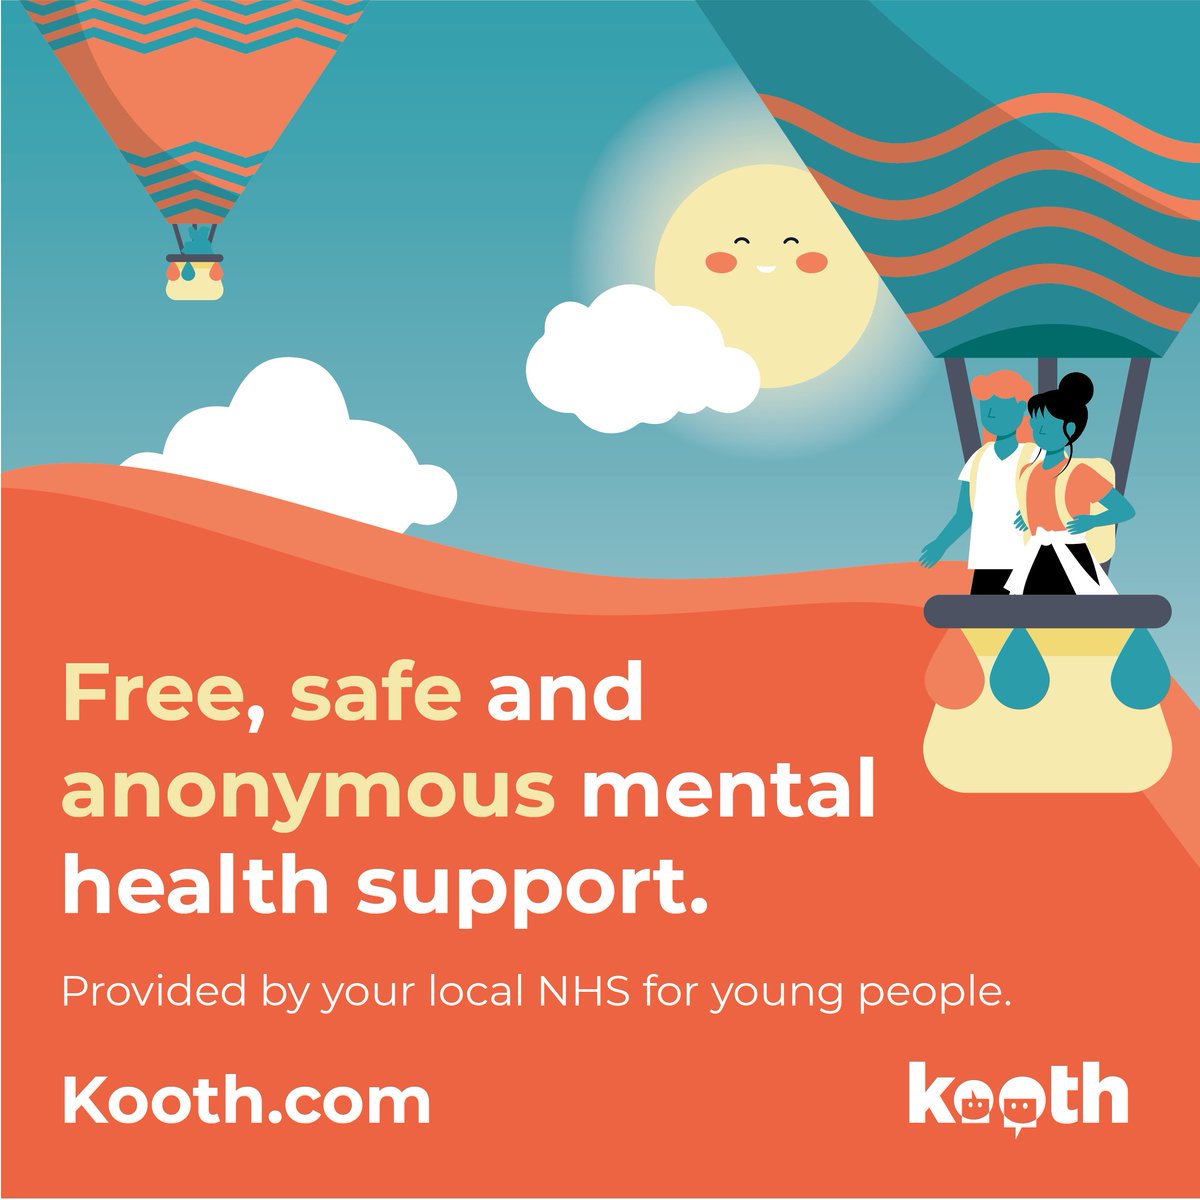 Whatever is on your mind this half-term holiday, Kooth is here to listen. Visit Kooth.com for help and advice.